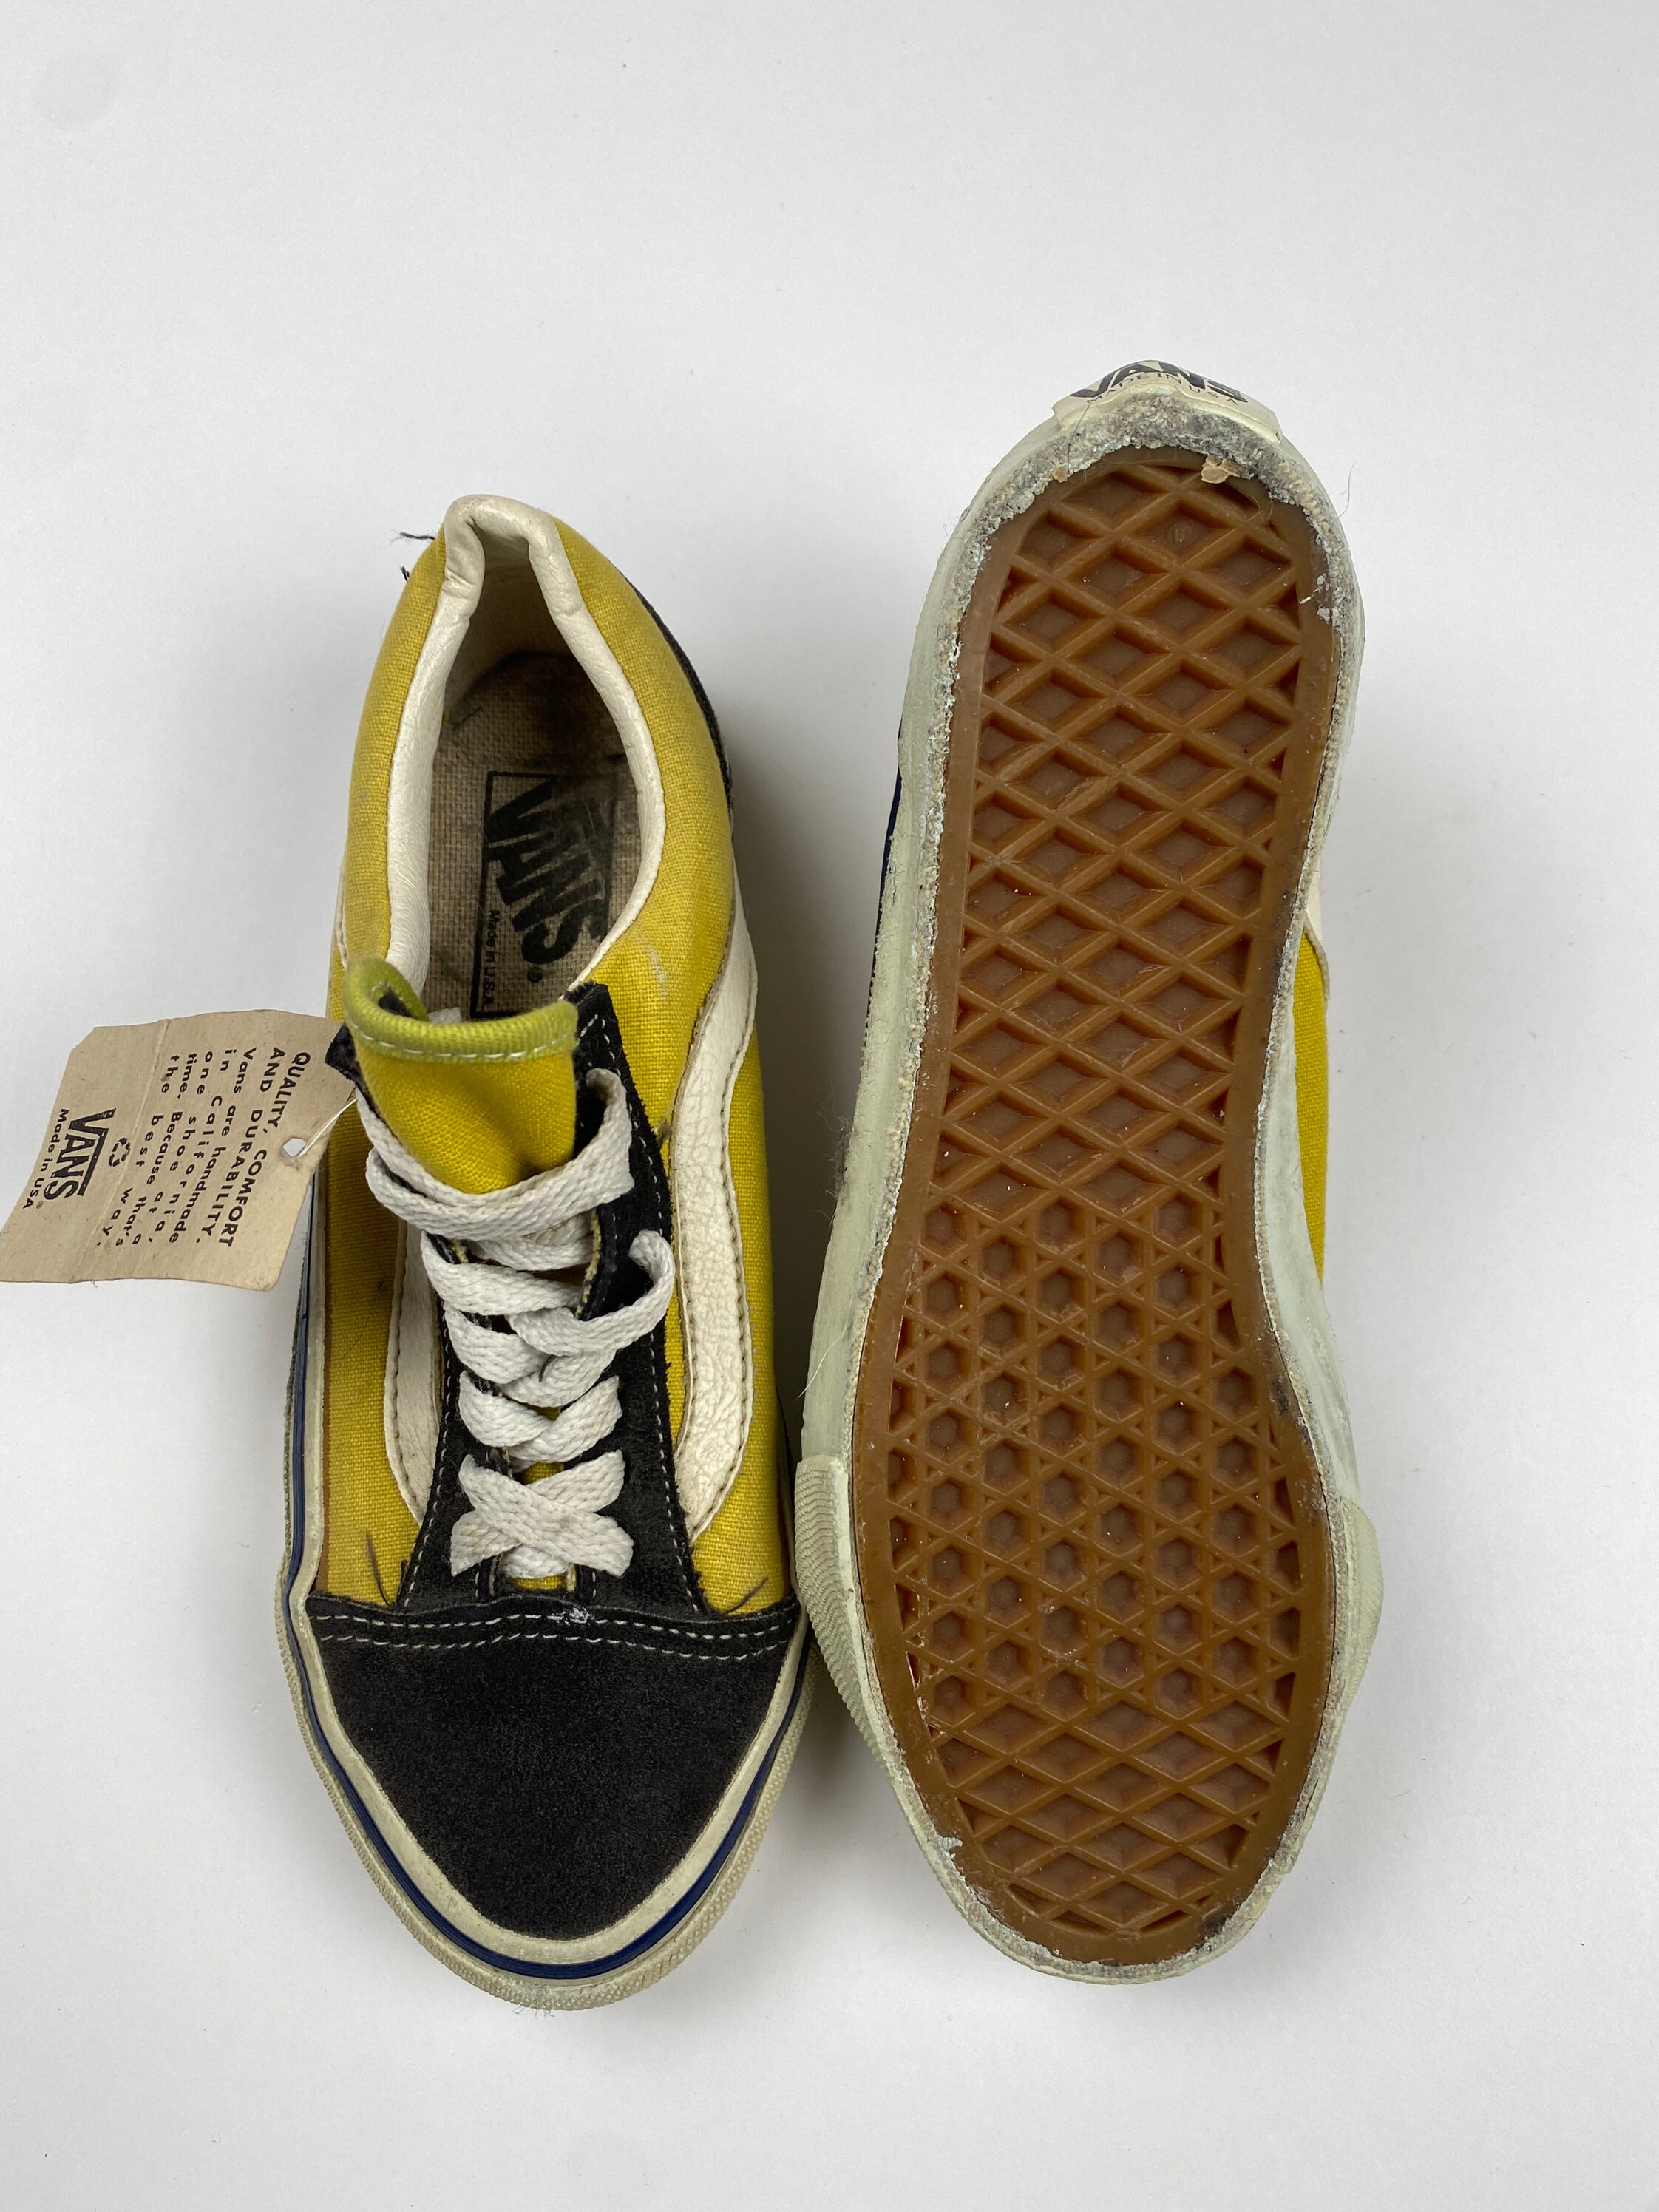 Vans Style 36 Size 5.5 Made in Usa Vintage Vans Shoes - Etsy Norway